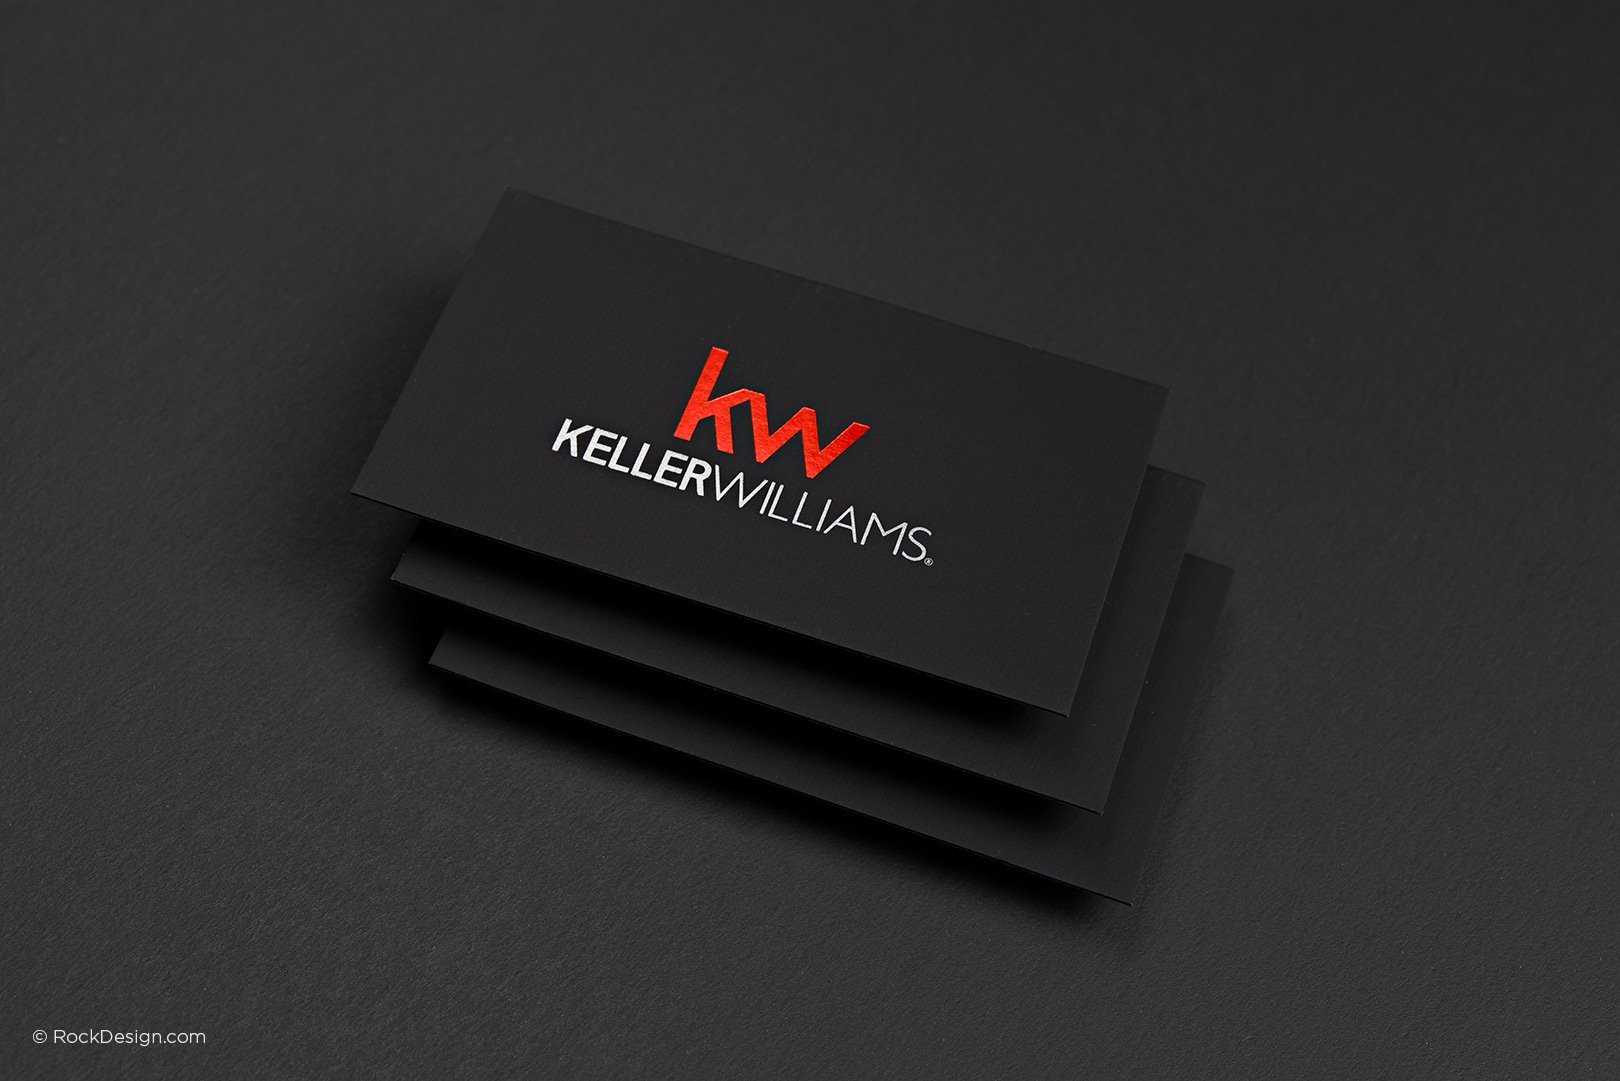 Free Keller Williams Business Card Template With Print In Real Estate Business Cards Templates Free